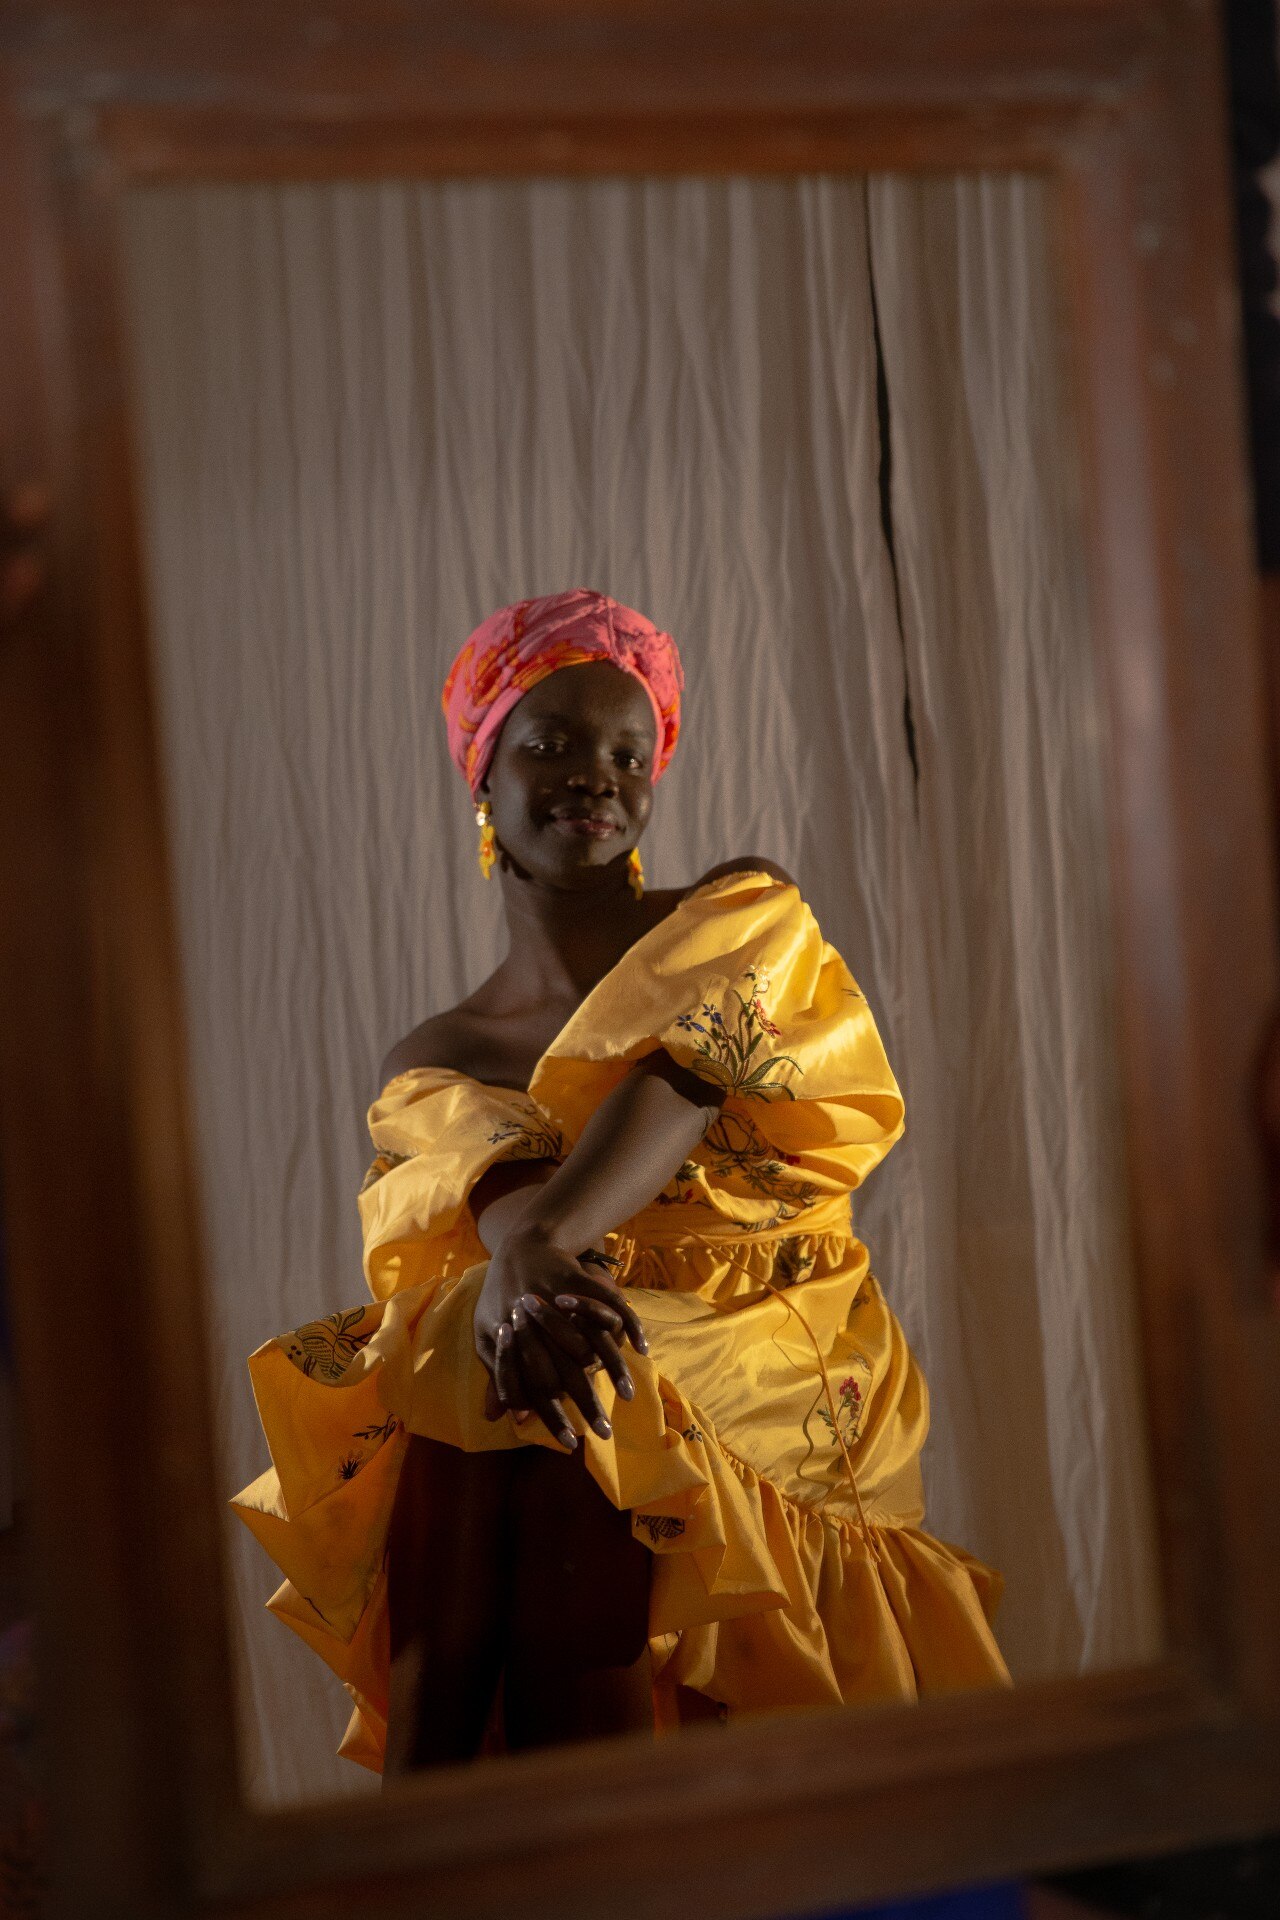 A 20-something African woman poses at the mirror with a smile, wearing a yellow dress and pink turban, her hands on her knees 